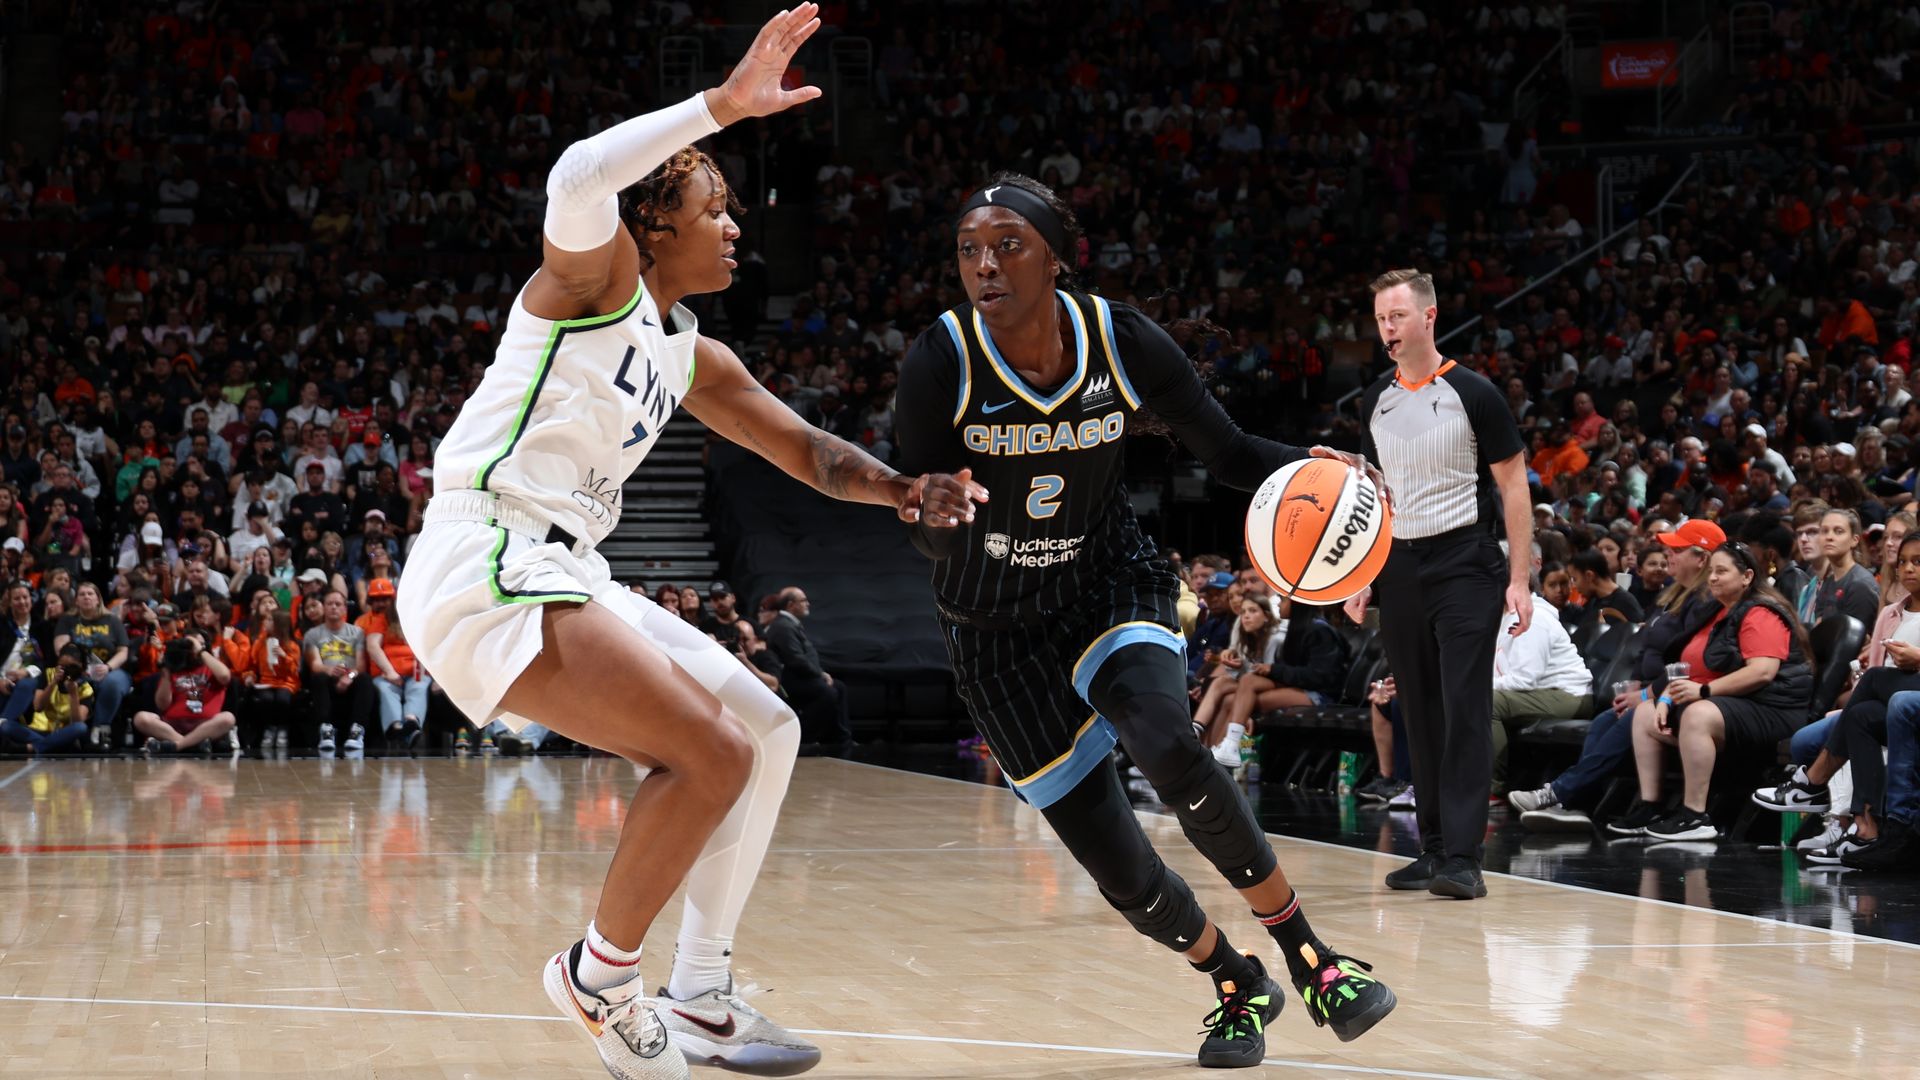 Kahleah Copper dribbles a basketball, trying to evade a defender of the Minnesota Lynx.